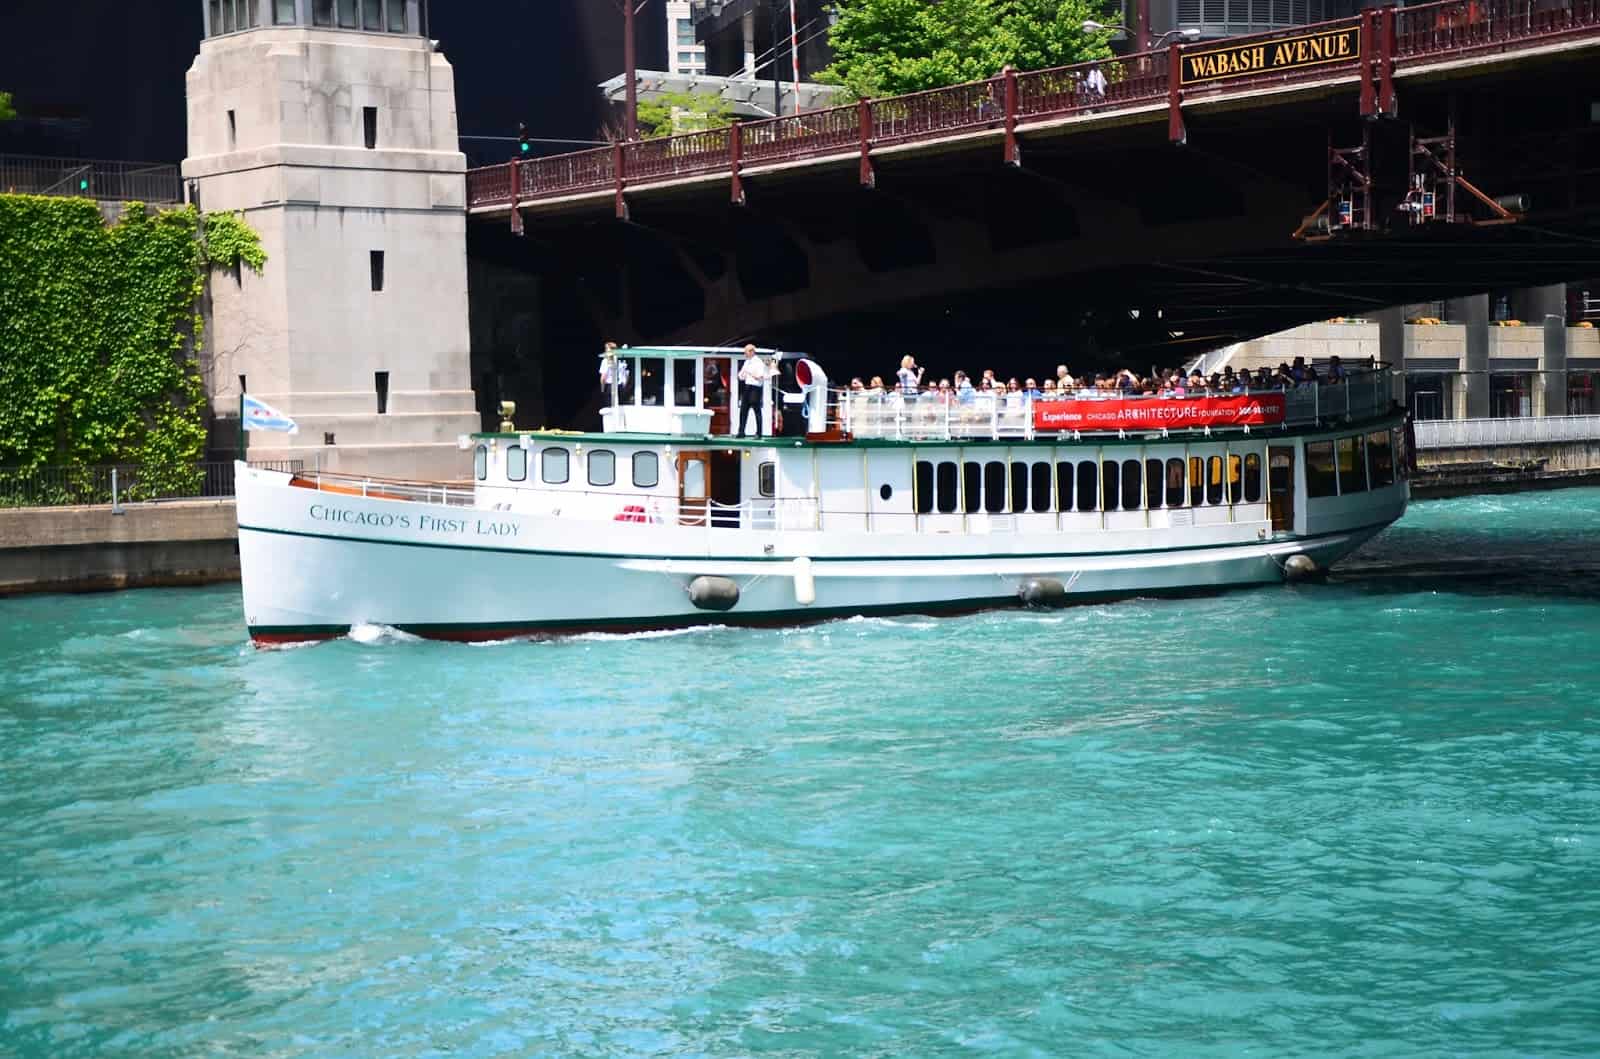 Chicago’s First Lady architecture cruise